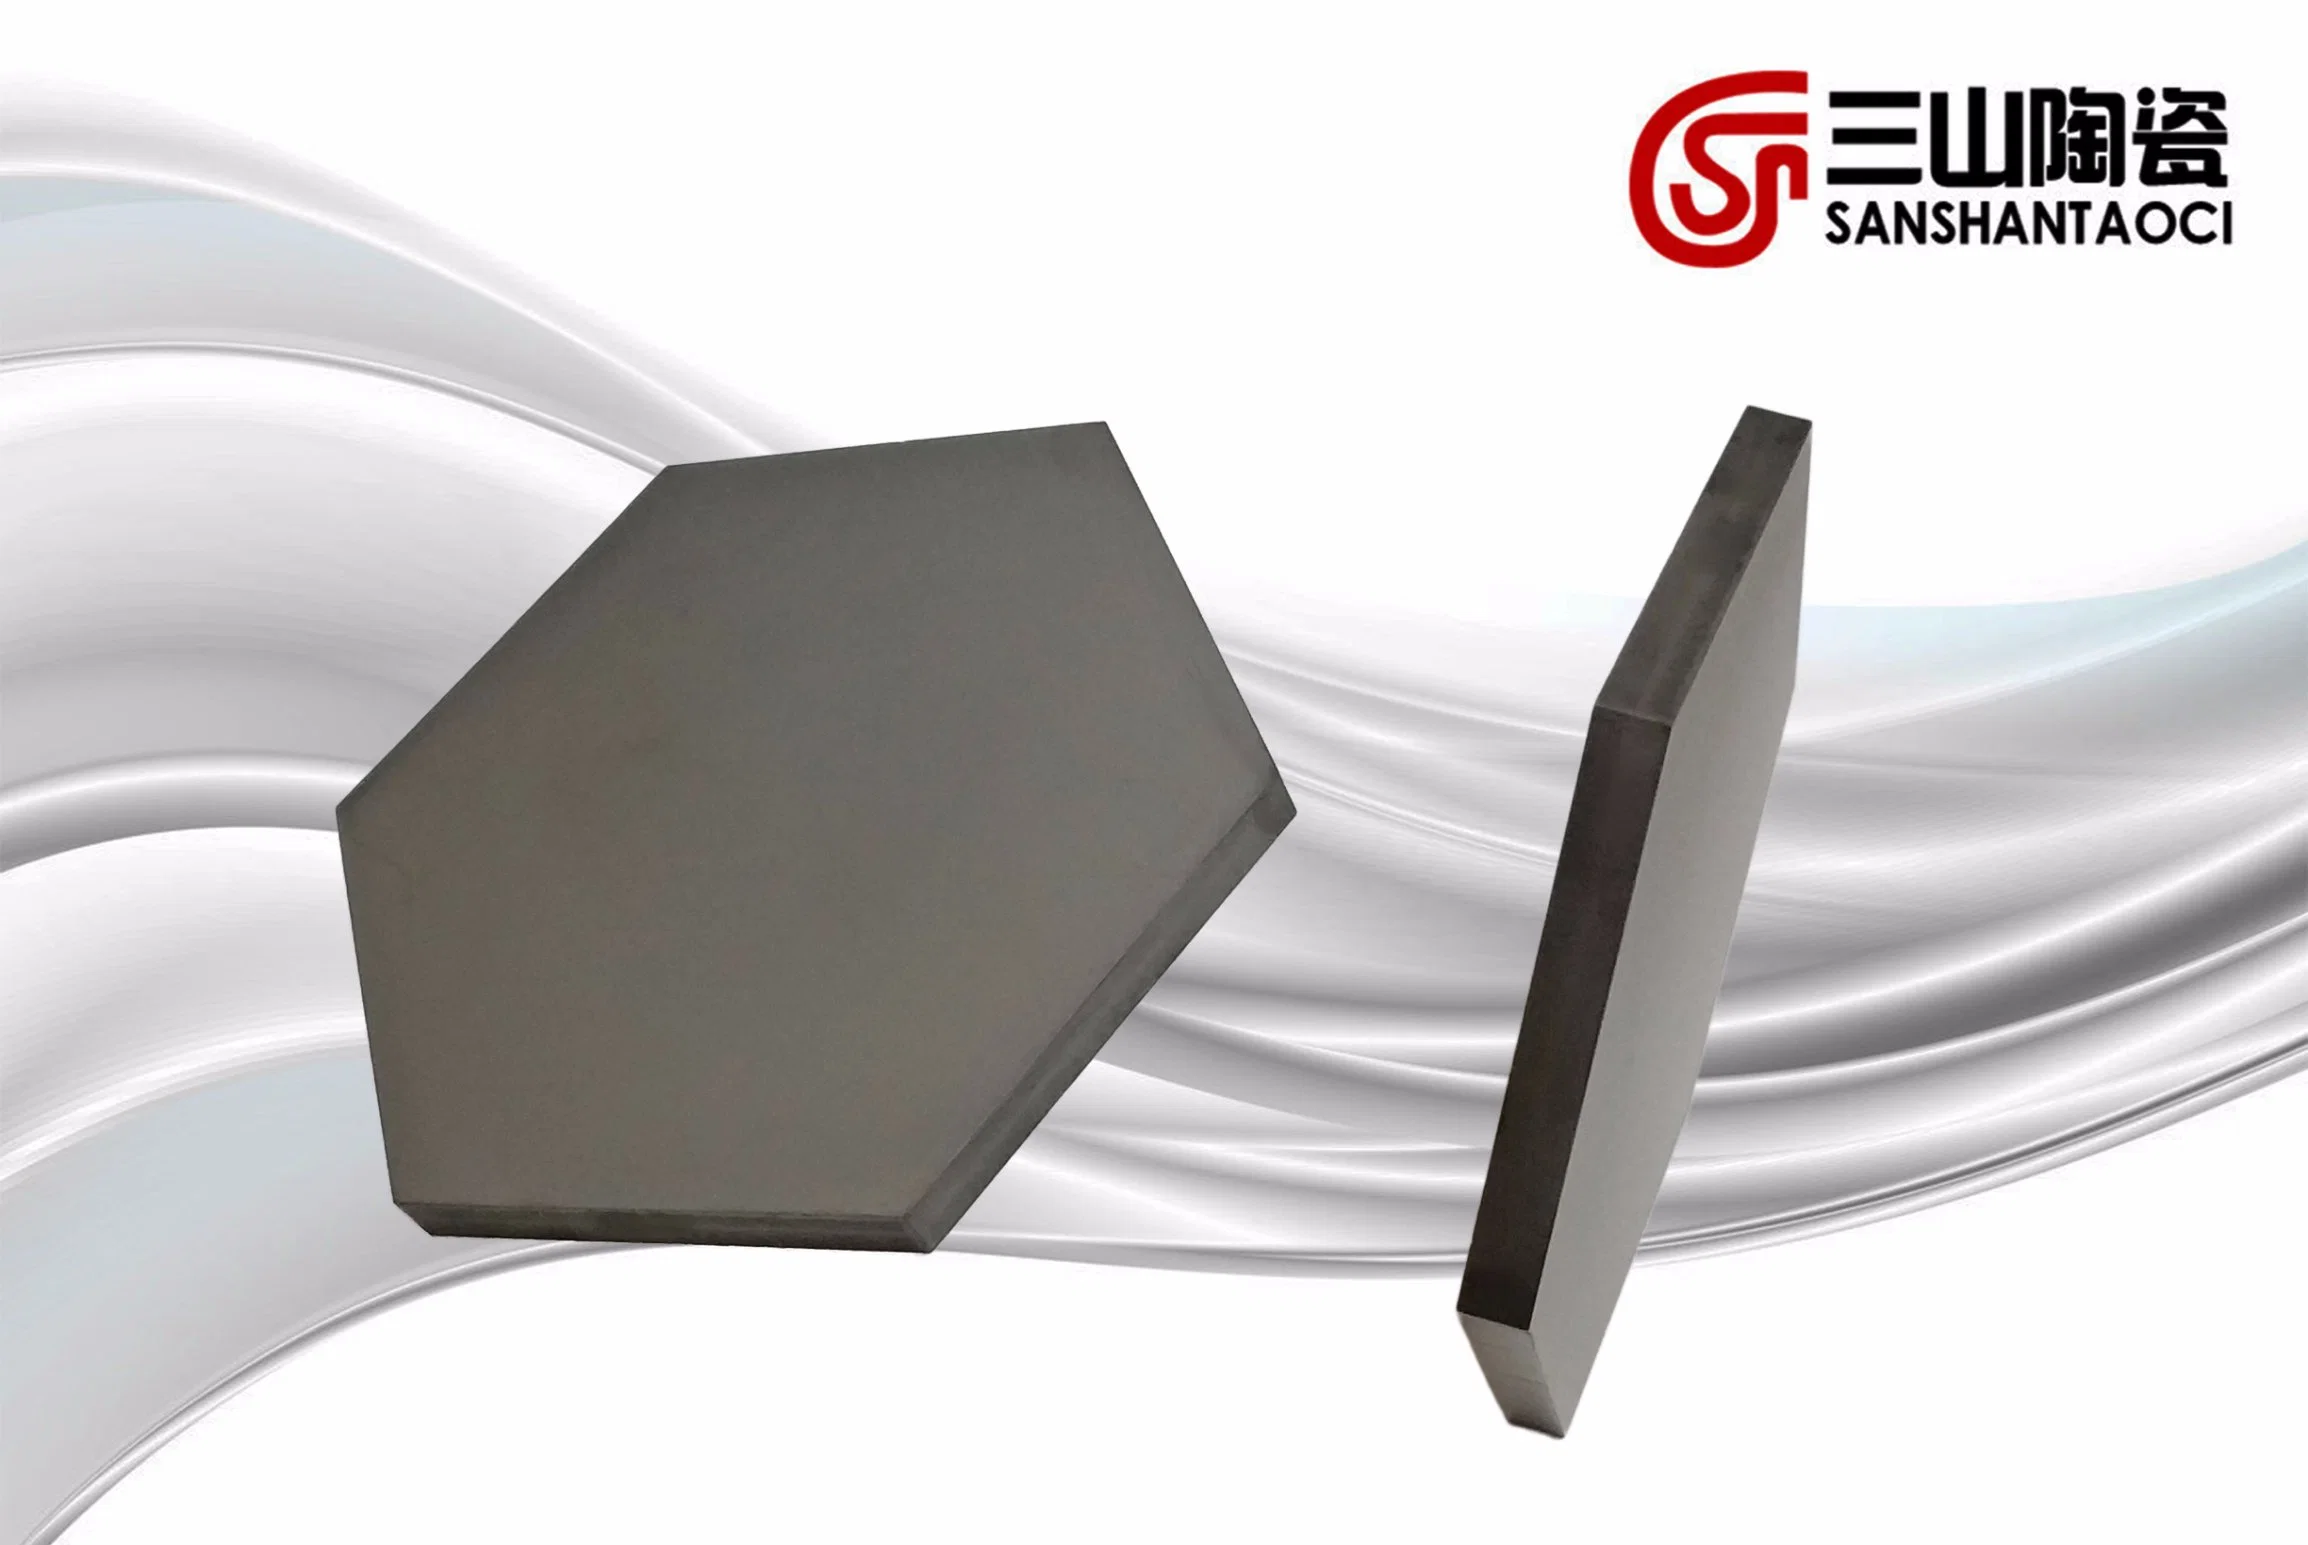 Bulletproof Ceramic Sintered Silicon Carbide Hexagon Opposite Angles 96mm Thickness 6mm